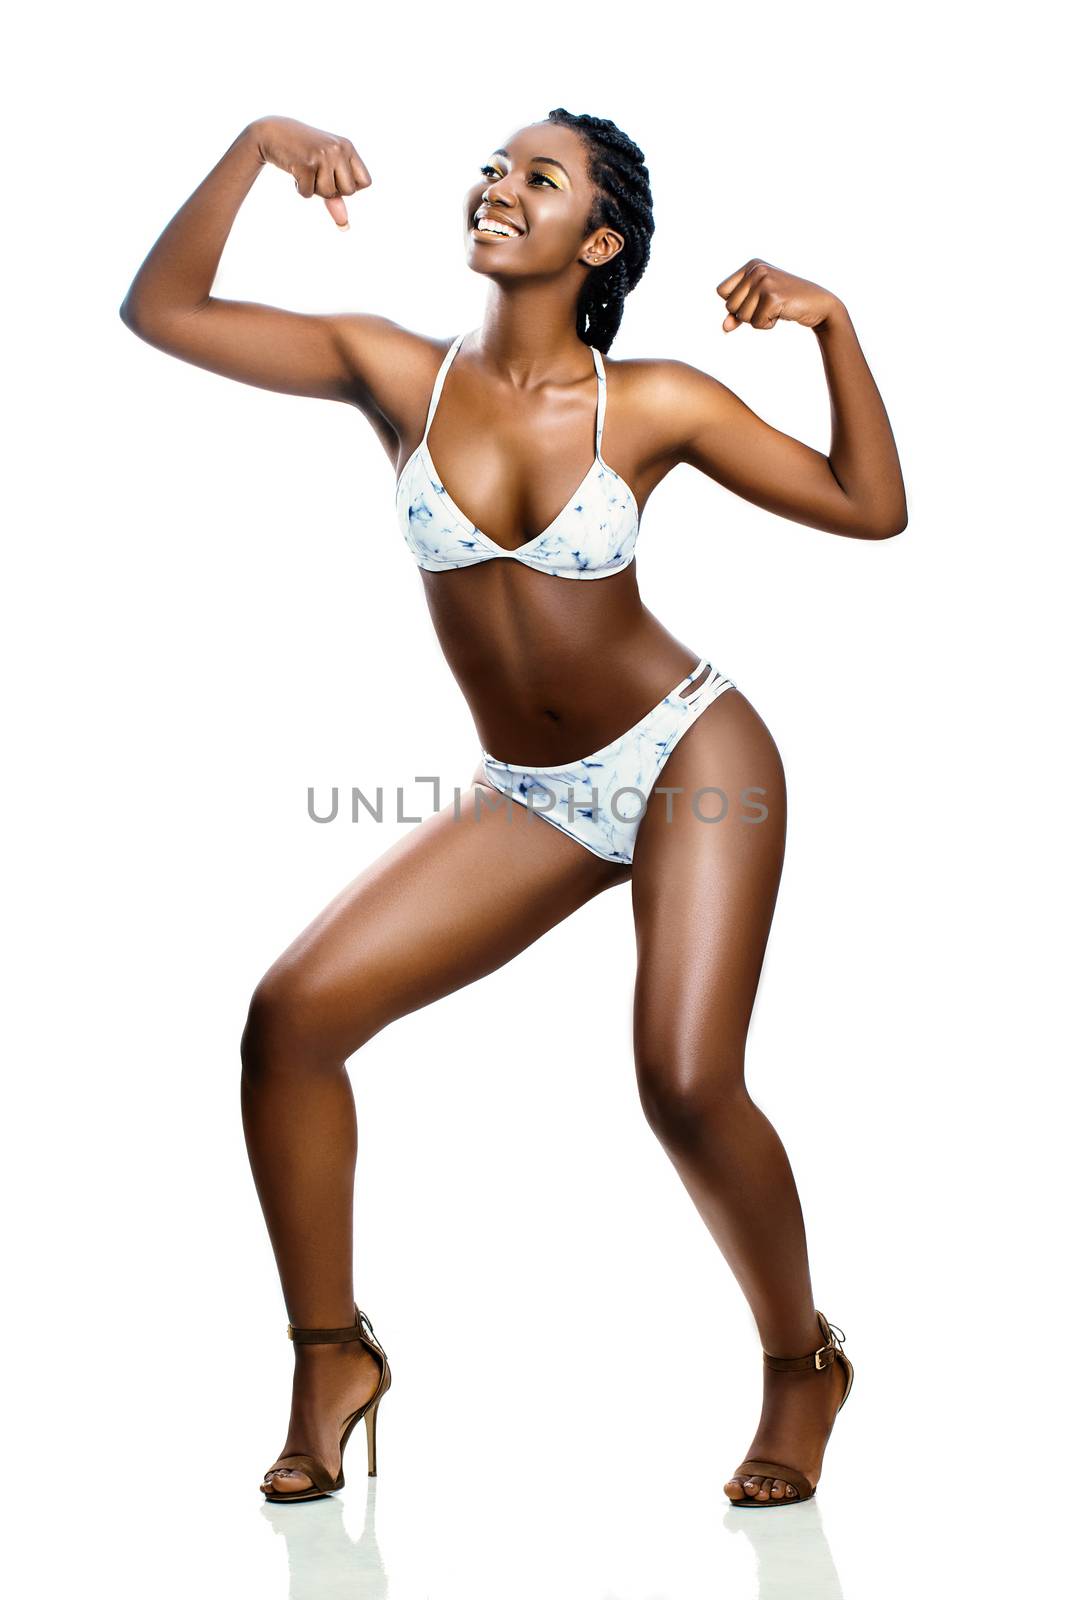 Full length studio portrait of attractive young african woman in bikini. Smiling girl showing muscles raising arms. Isolated on white background.